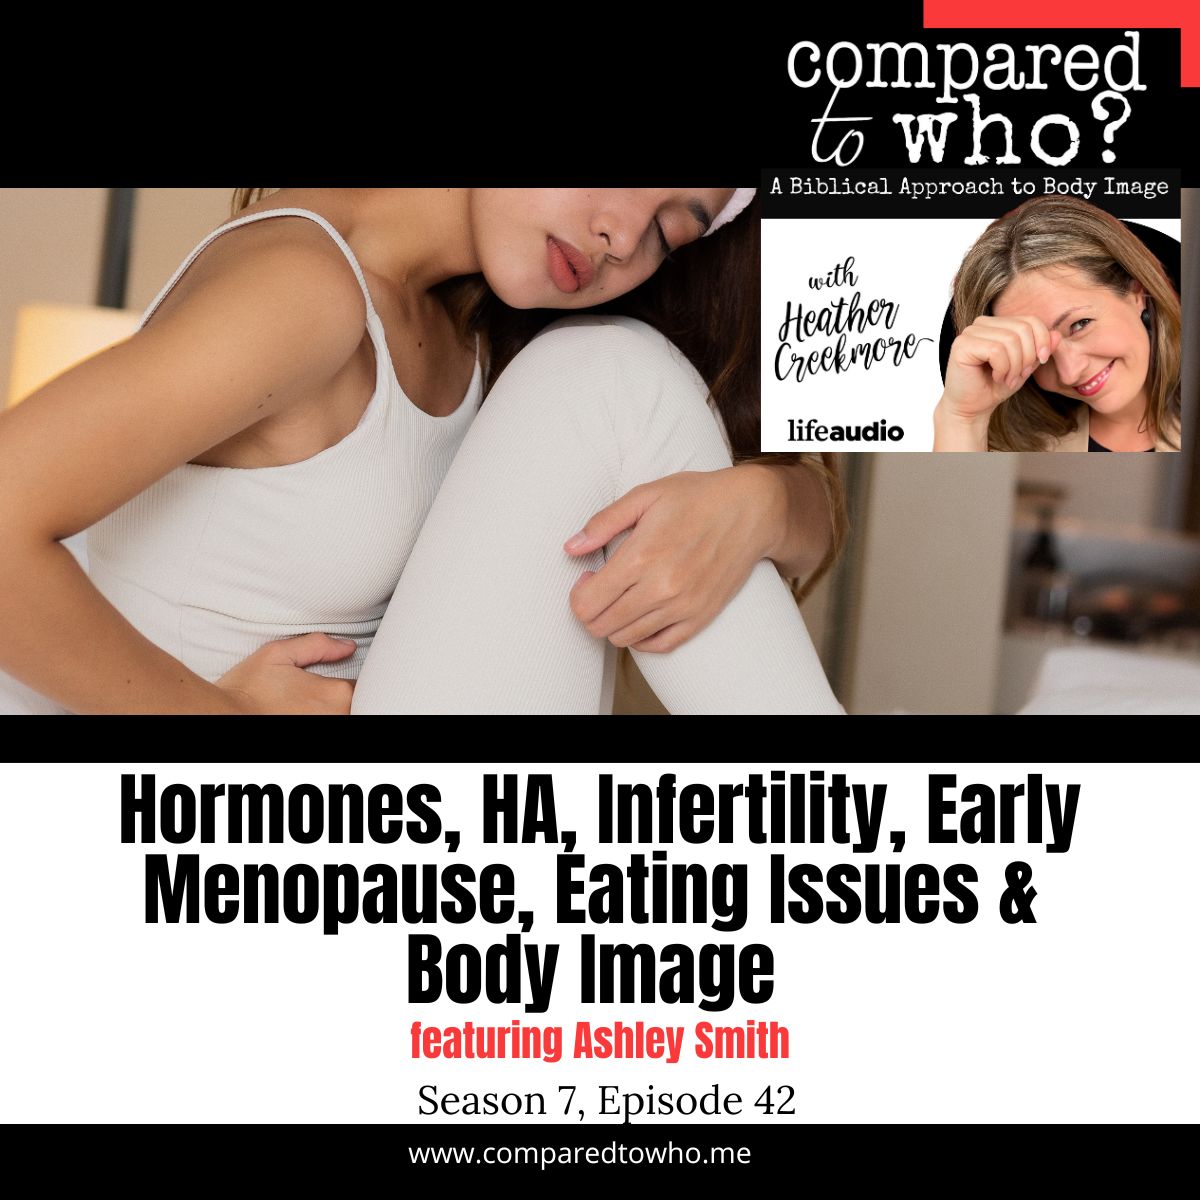 Hormones, HA, Infertility, Early Menopause, Eating Disorders & Body Image